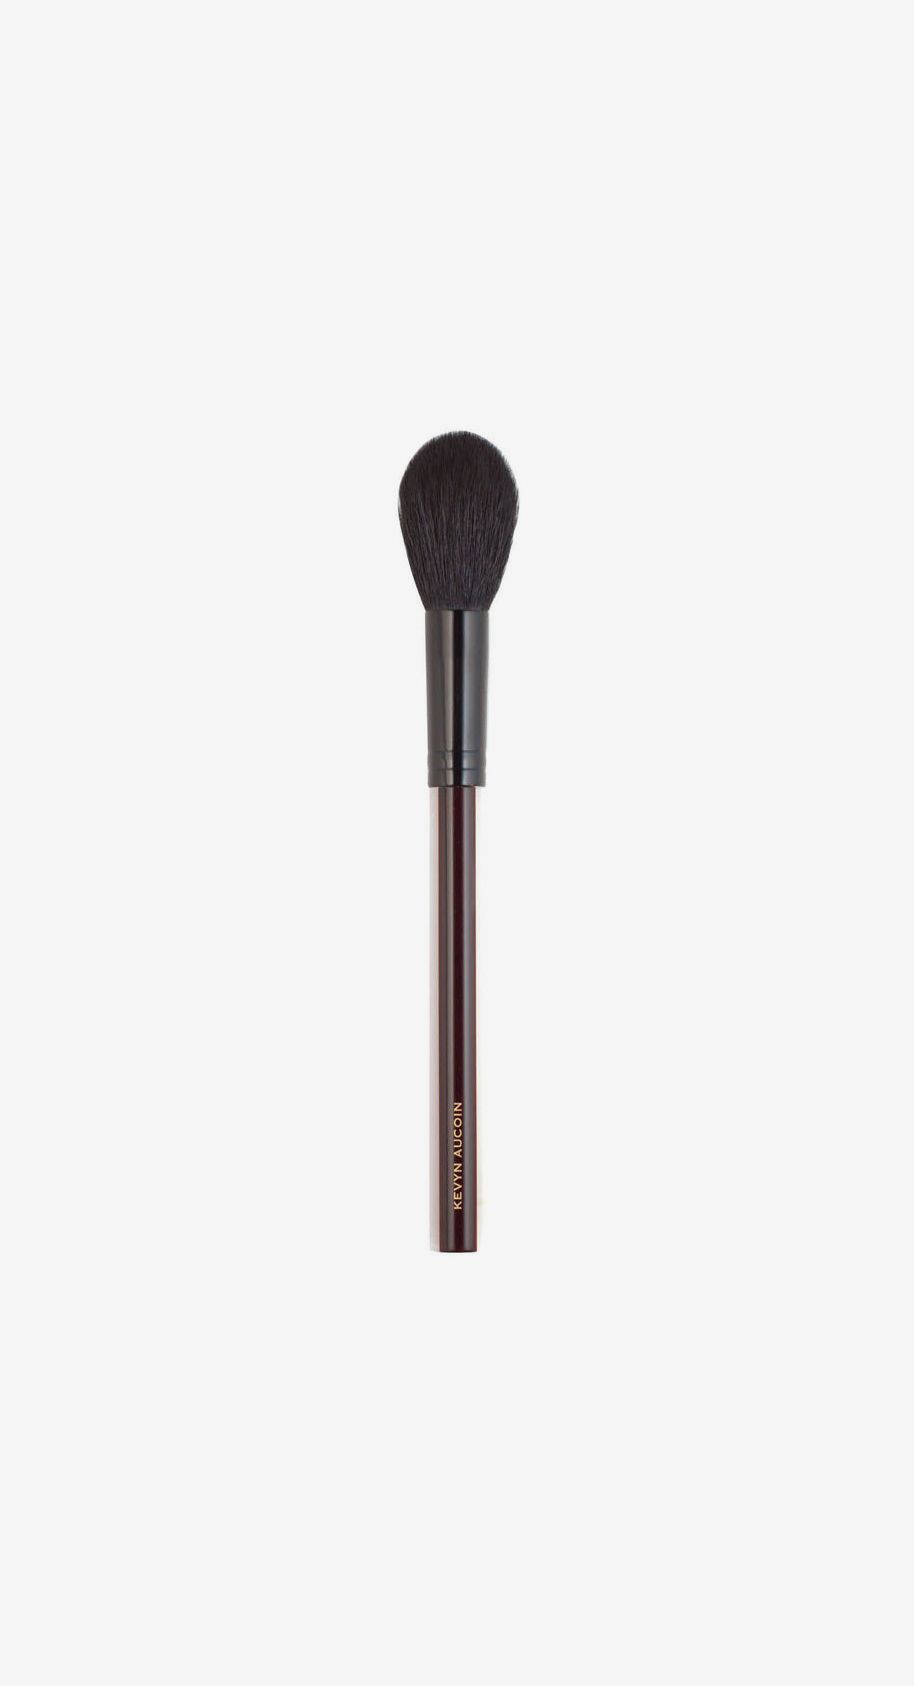 20 Best Makeup Brushes That Professionals Swear By 2022: Ulta, Sephora,  Nordstrom, , and More